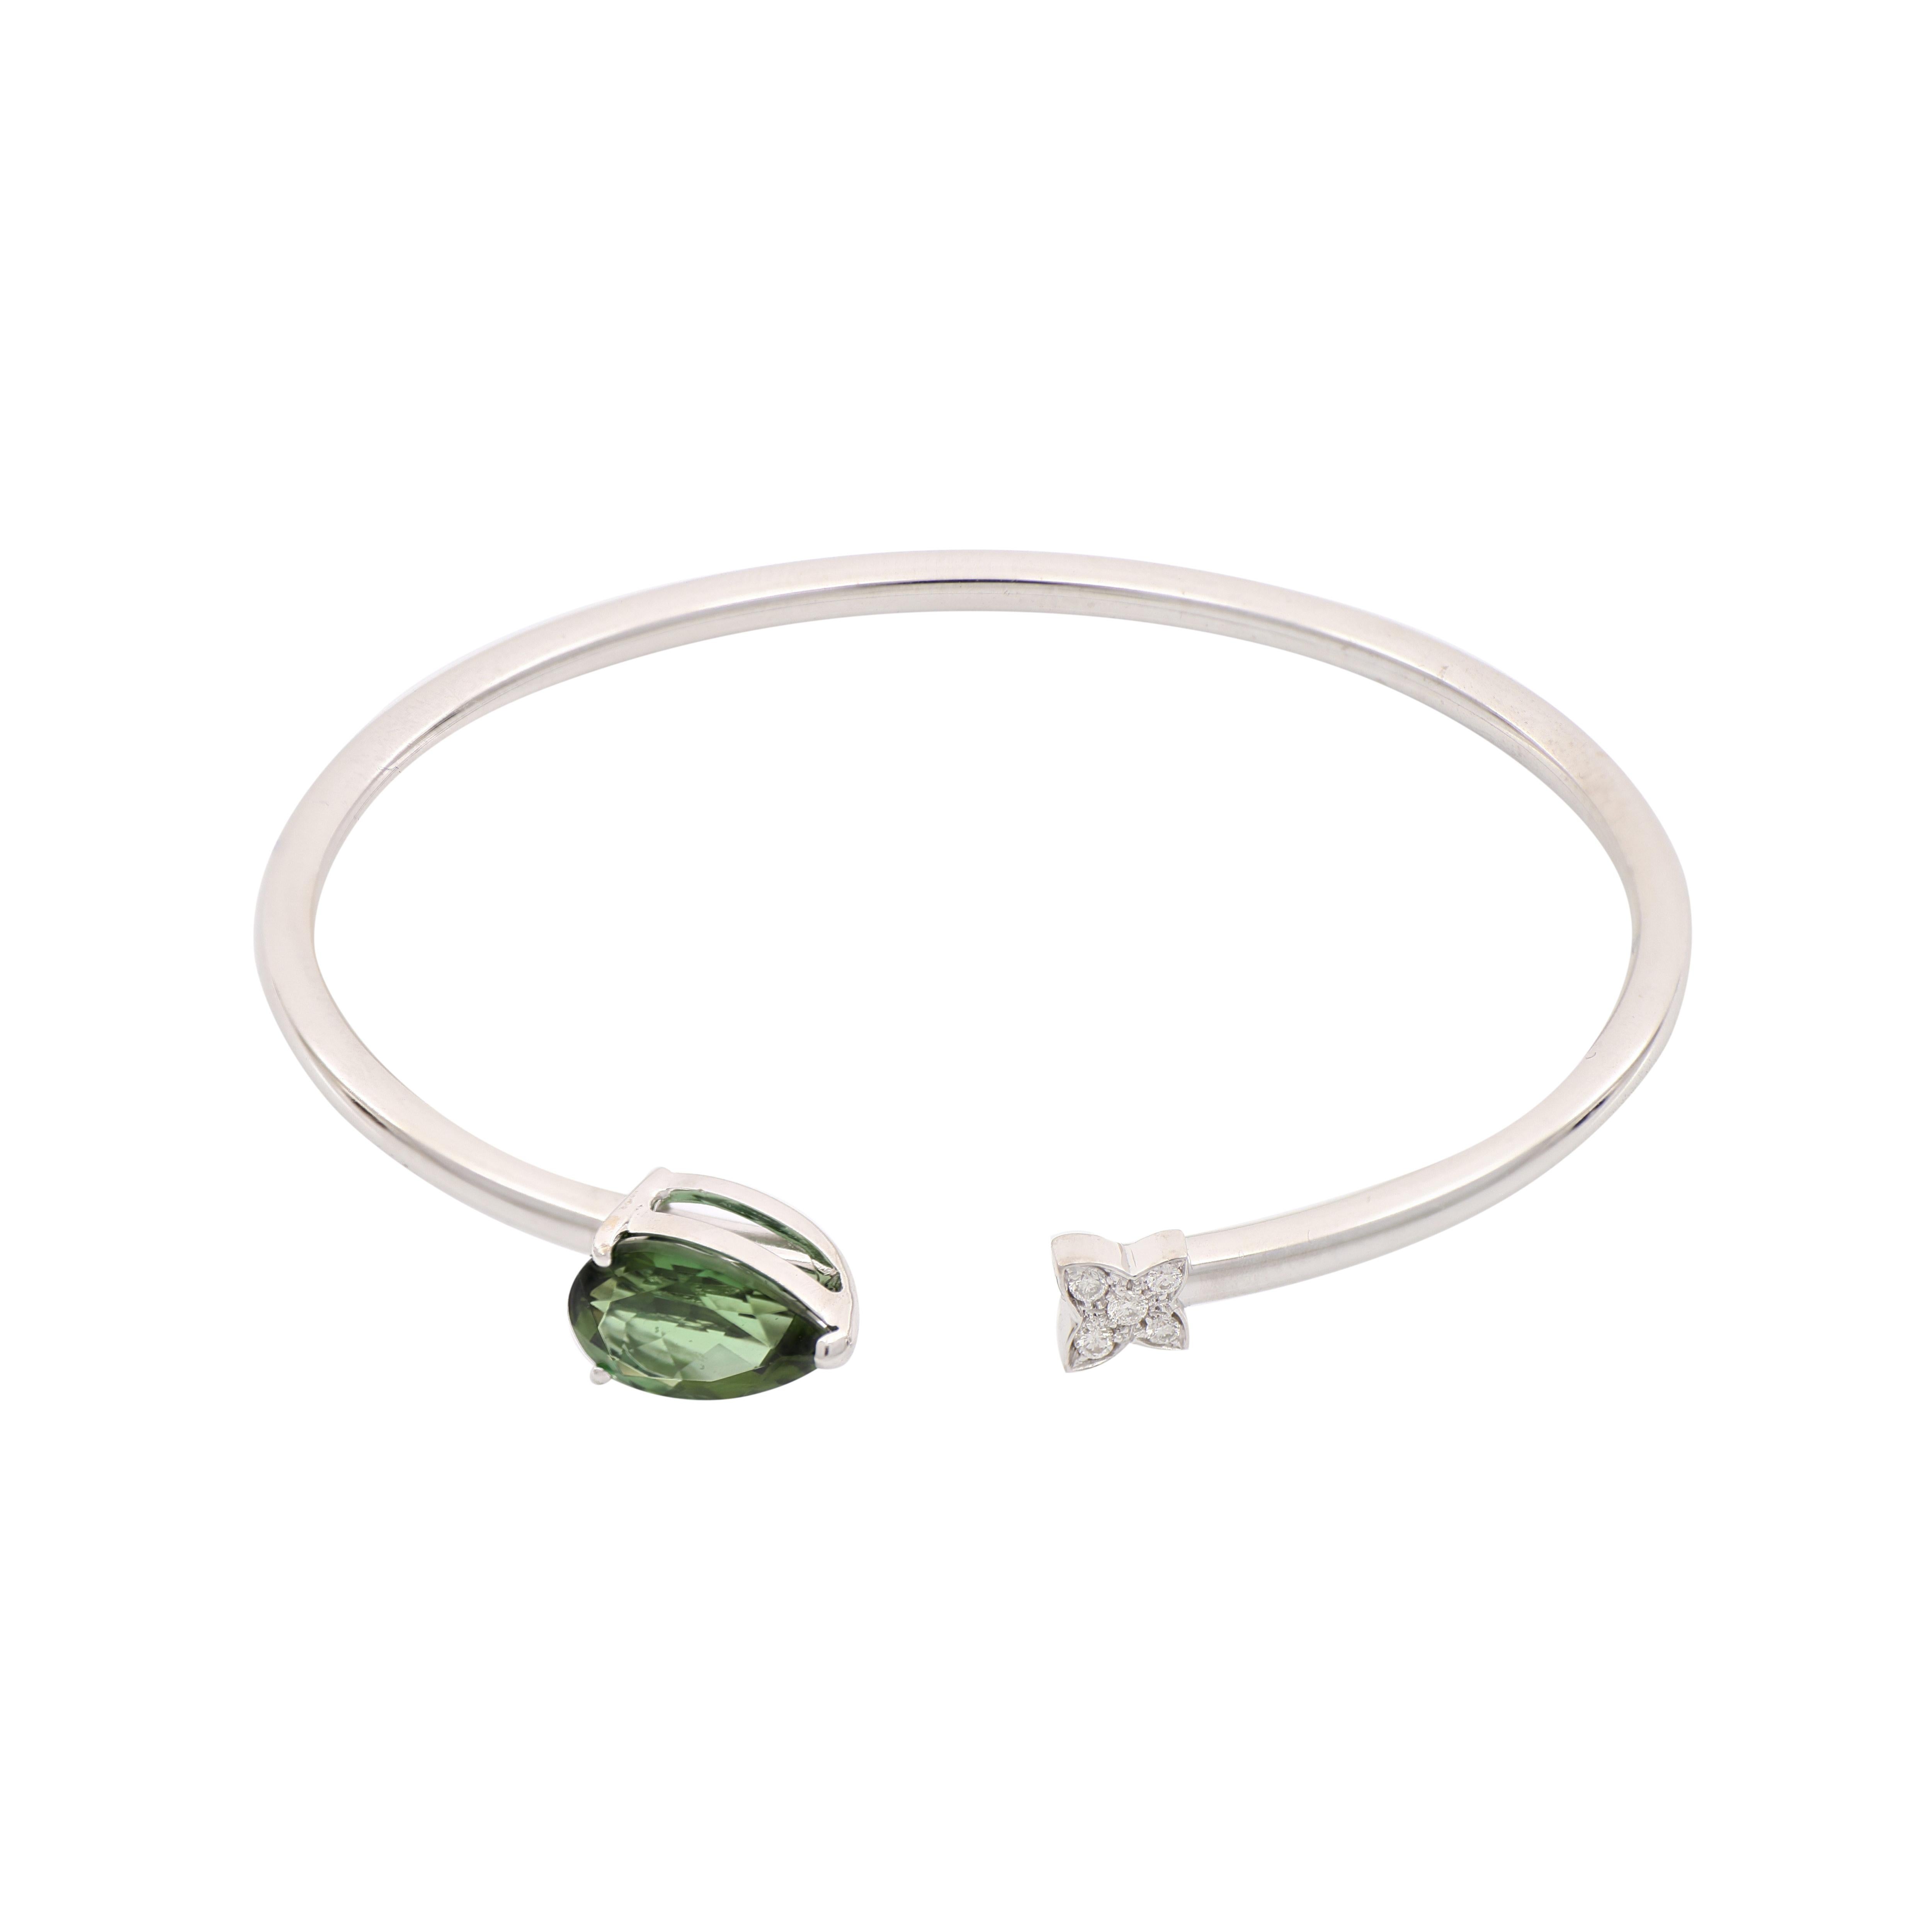 This sleek, 18 Kt white gold open-cuff bangle bracelet features a pear-cut green tourmaline on one end and white diamonds on the other end. Tourmaline is the newer October birthstone that can help polarize people's emotions and energy. It is said to